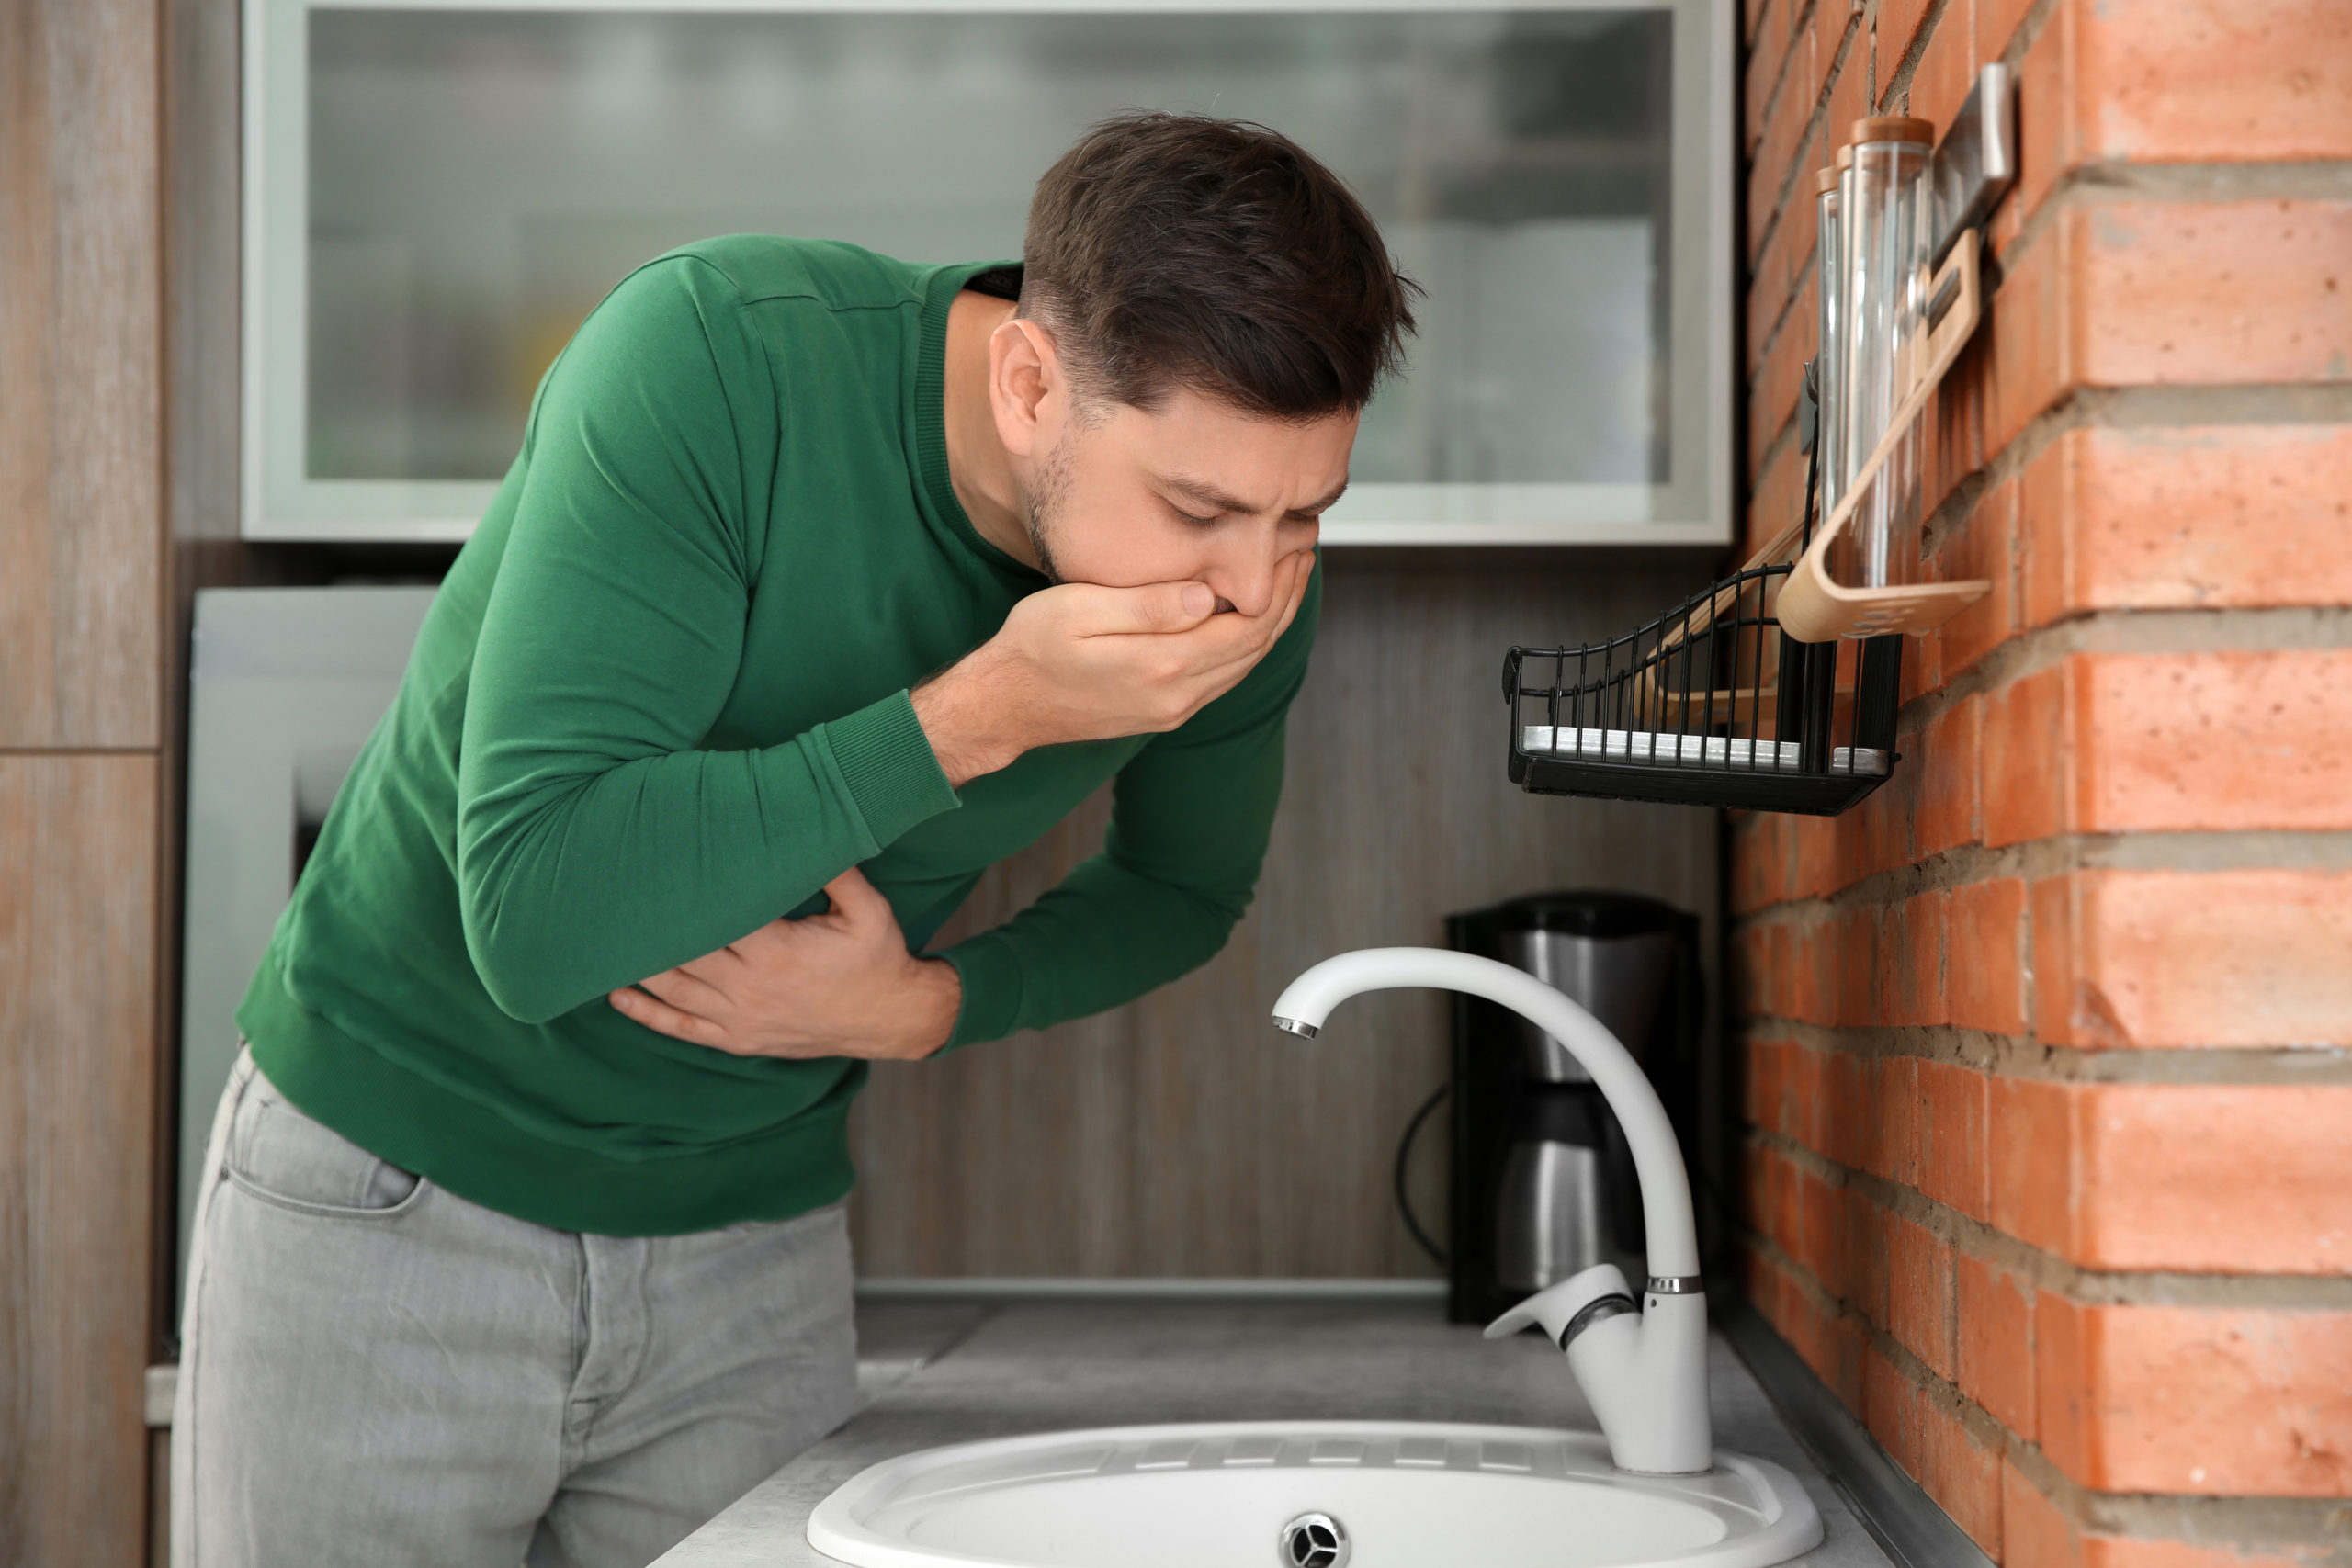 Nausea and Vomiting - Causes, Treatment and Prevention